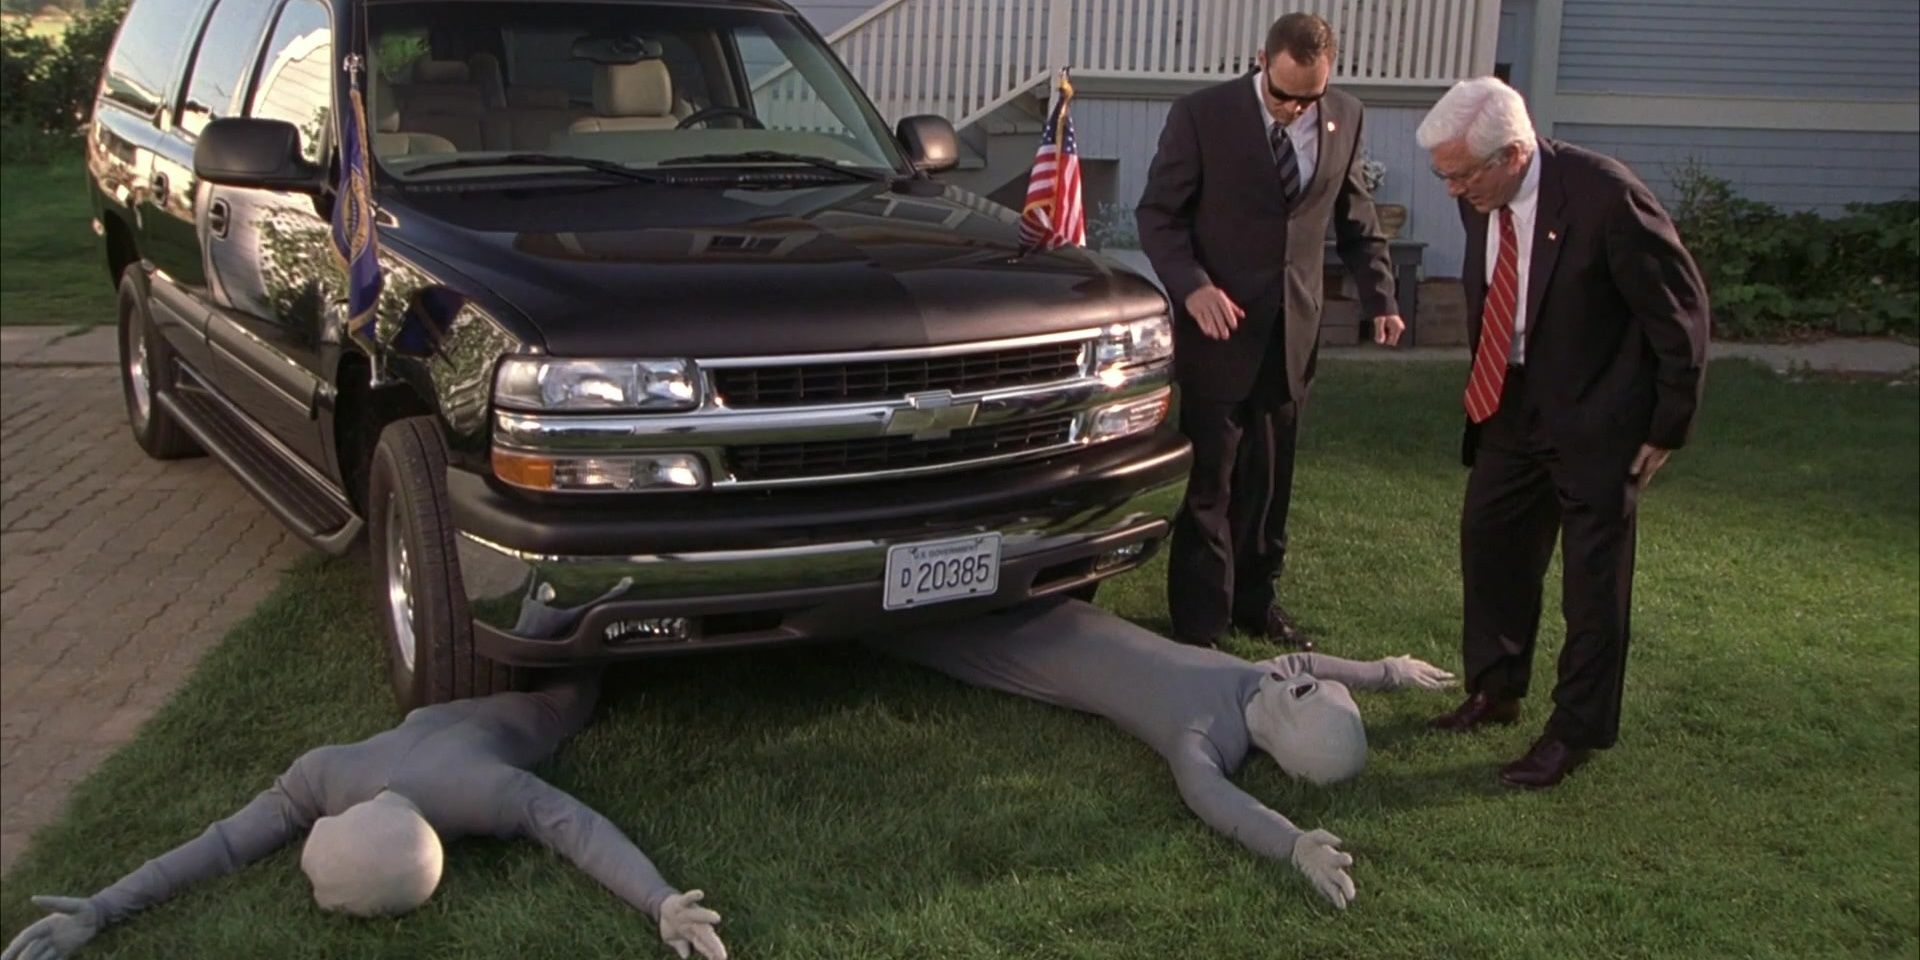 The President runs over an alien in Scary Movie 3